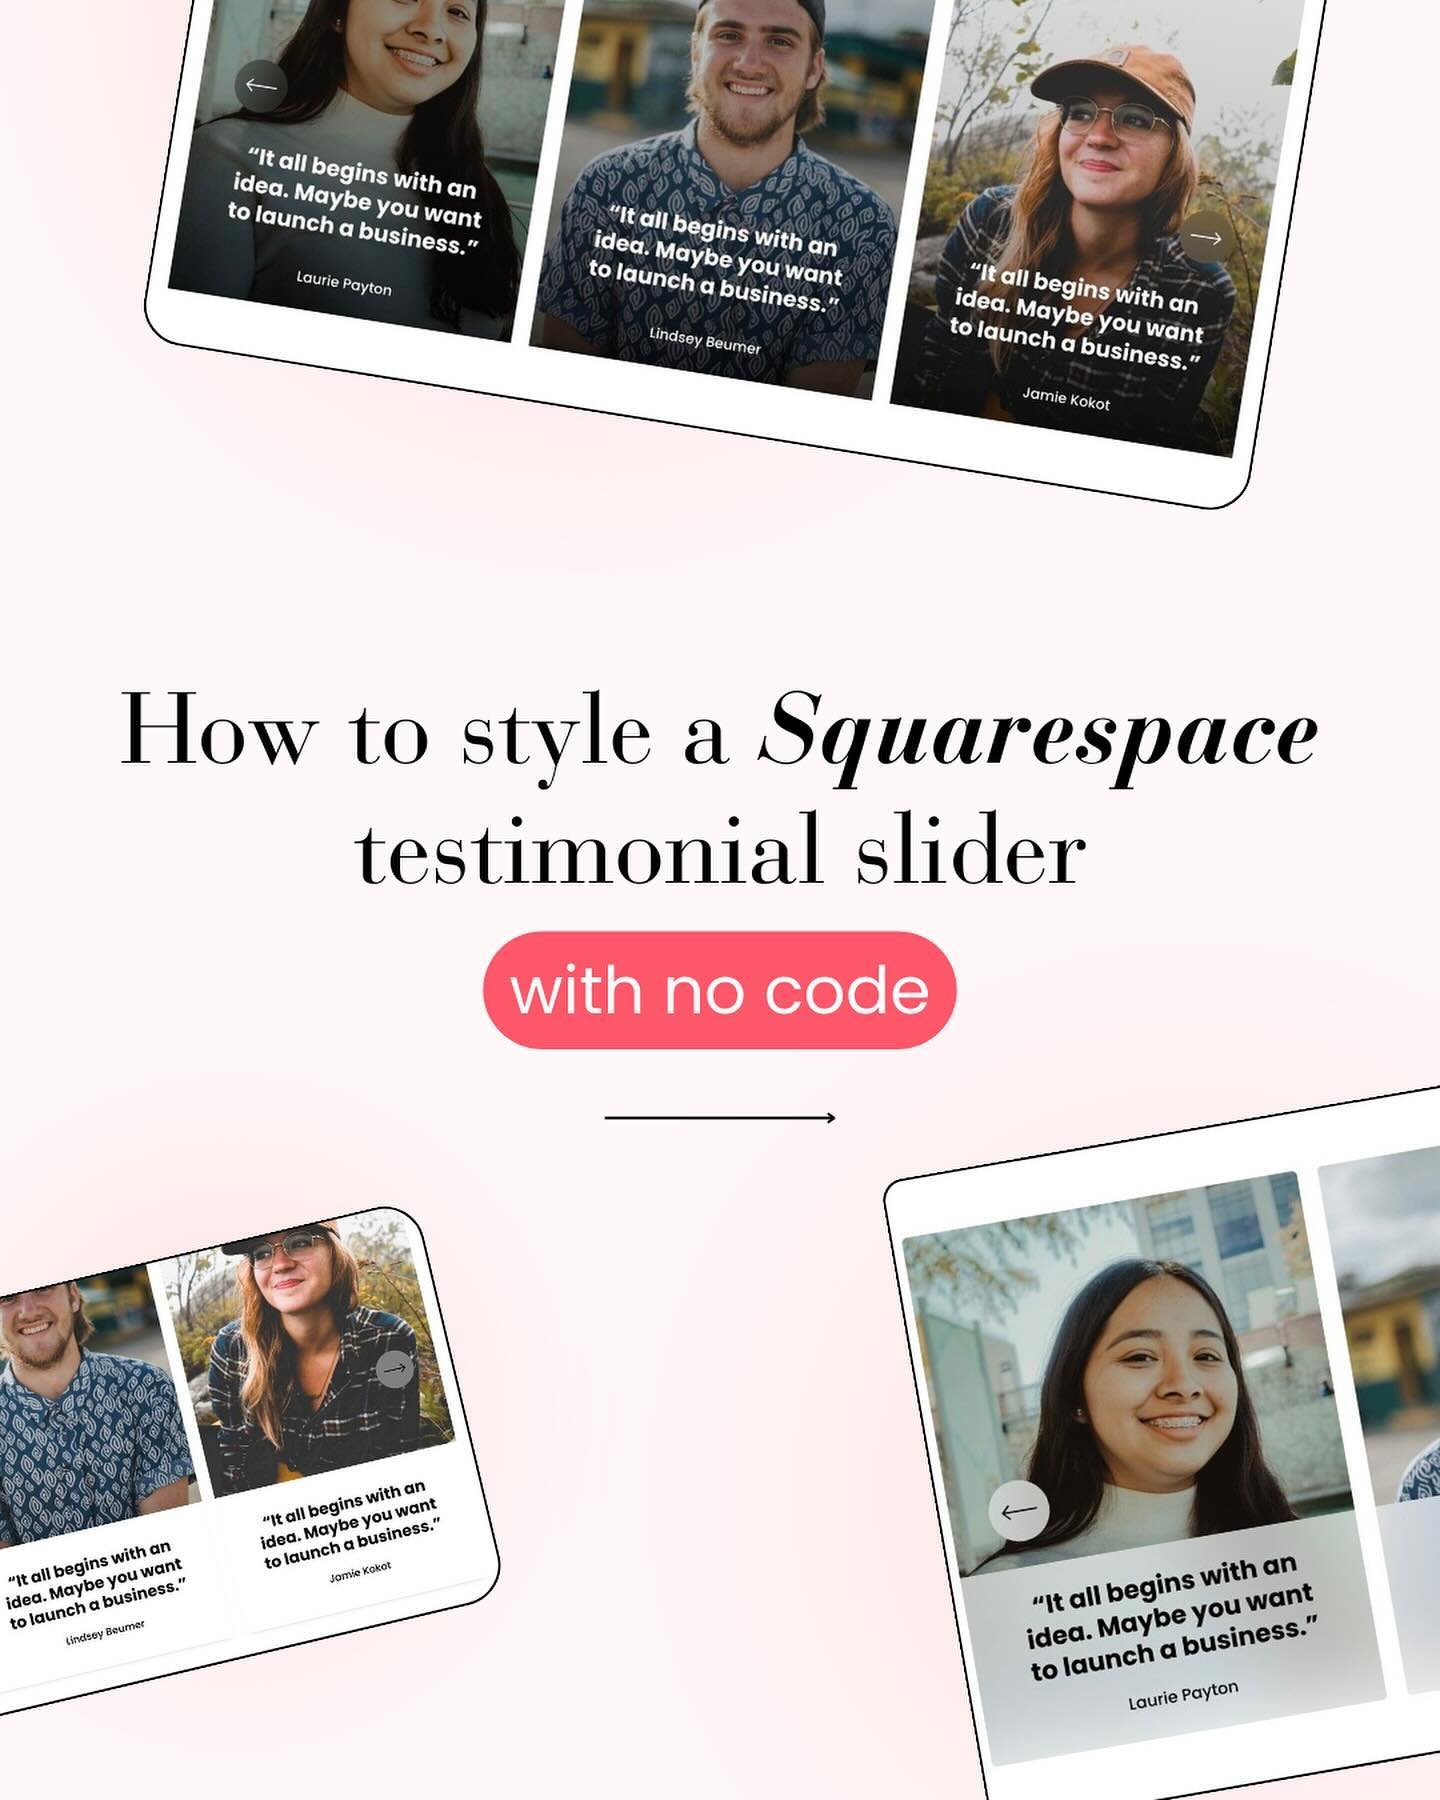 Just like when you&rsquo;re booking a photographer, choosing a restaurant, or purchasing a product, reviews are often the first thing you check, right? 

Well, the same goes for visitors to your Squarespace website! Whether it&rsquo;s for yourself or